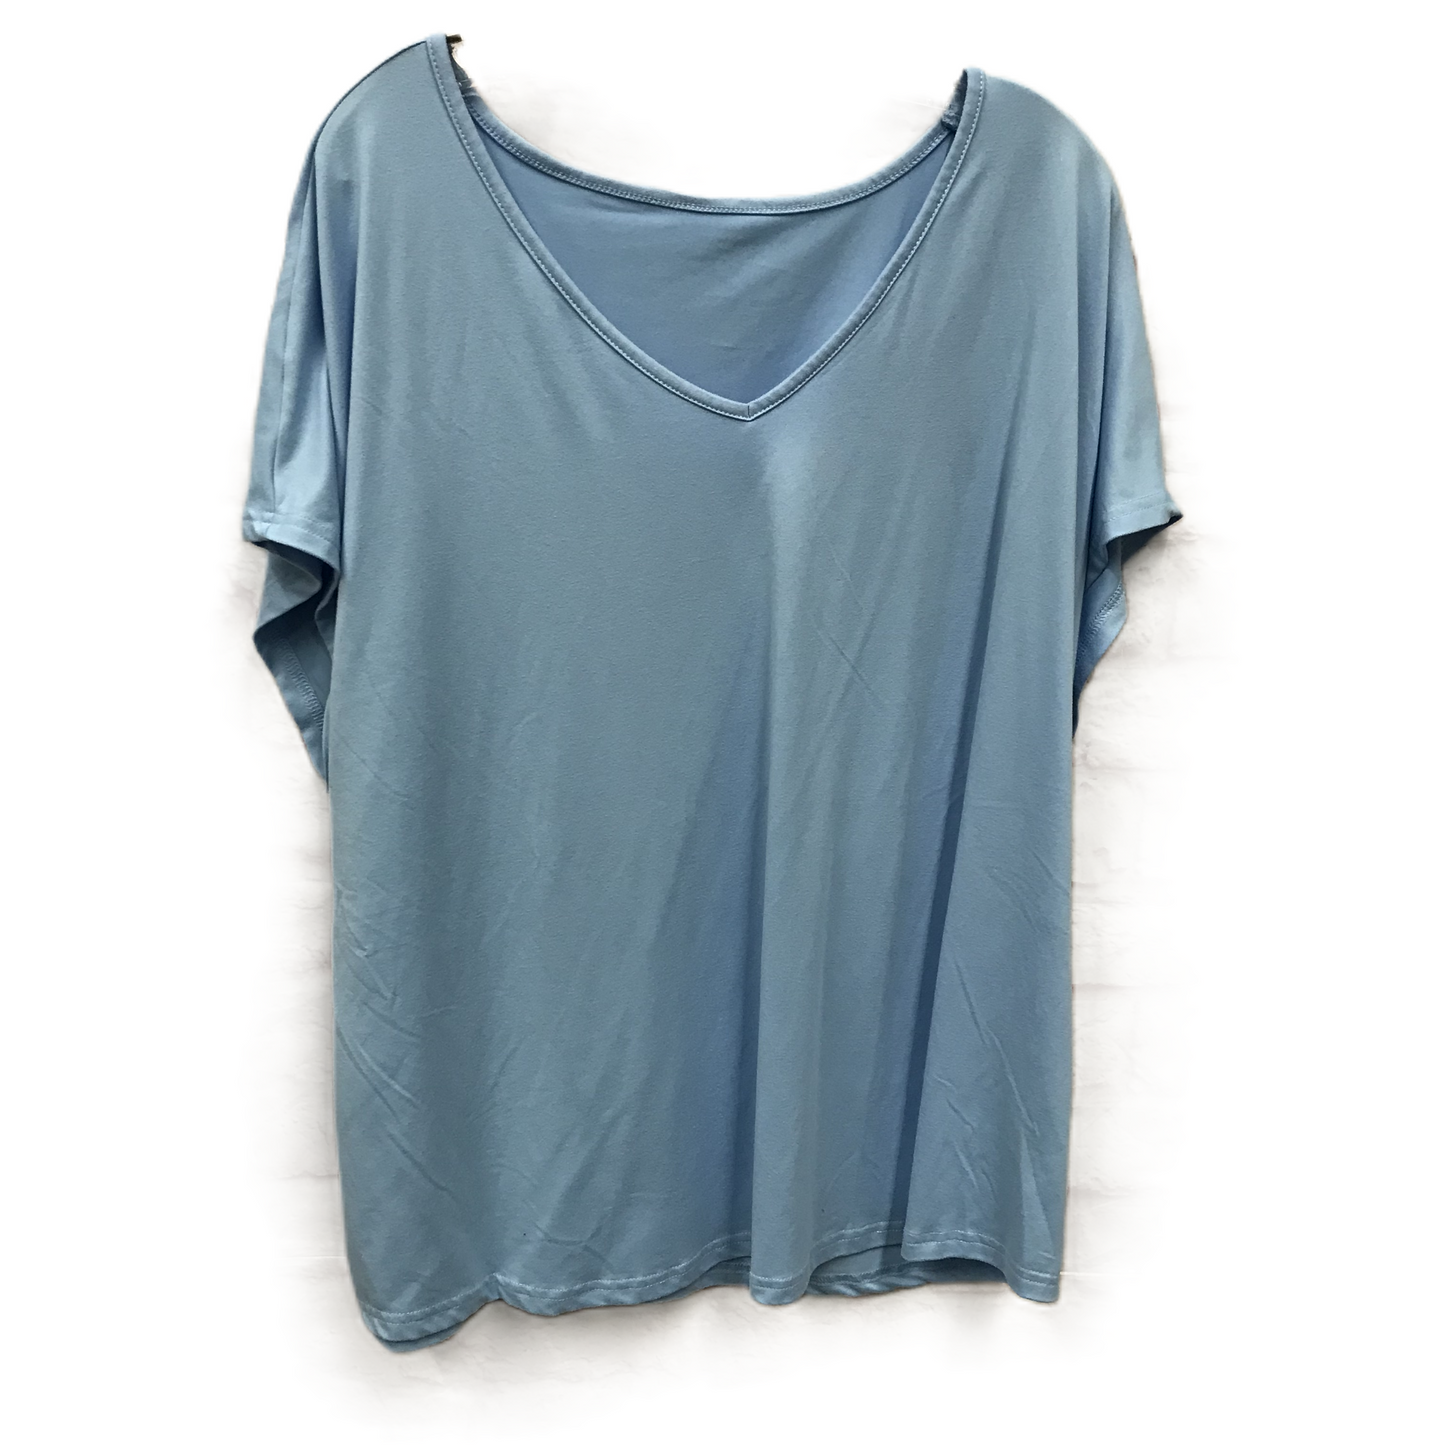 Blue Top Short Sleeve By Shein, Size: 3x